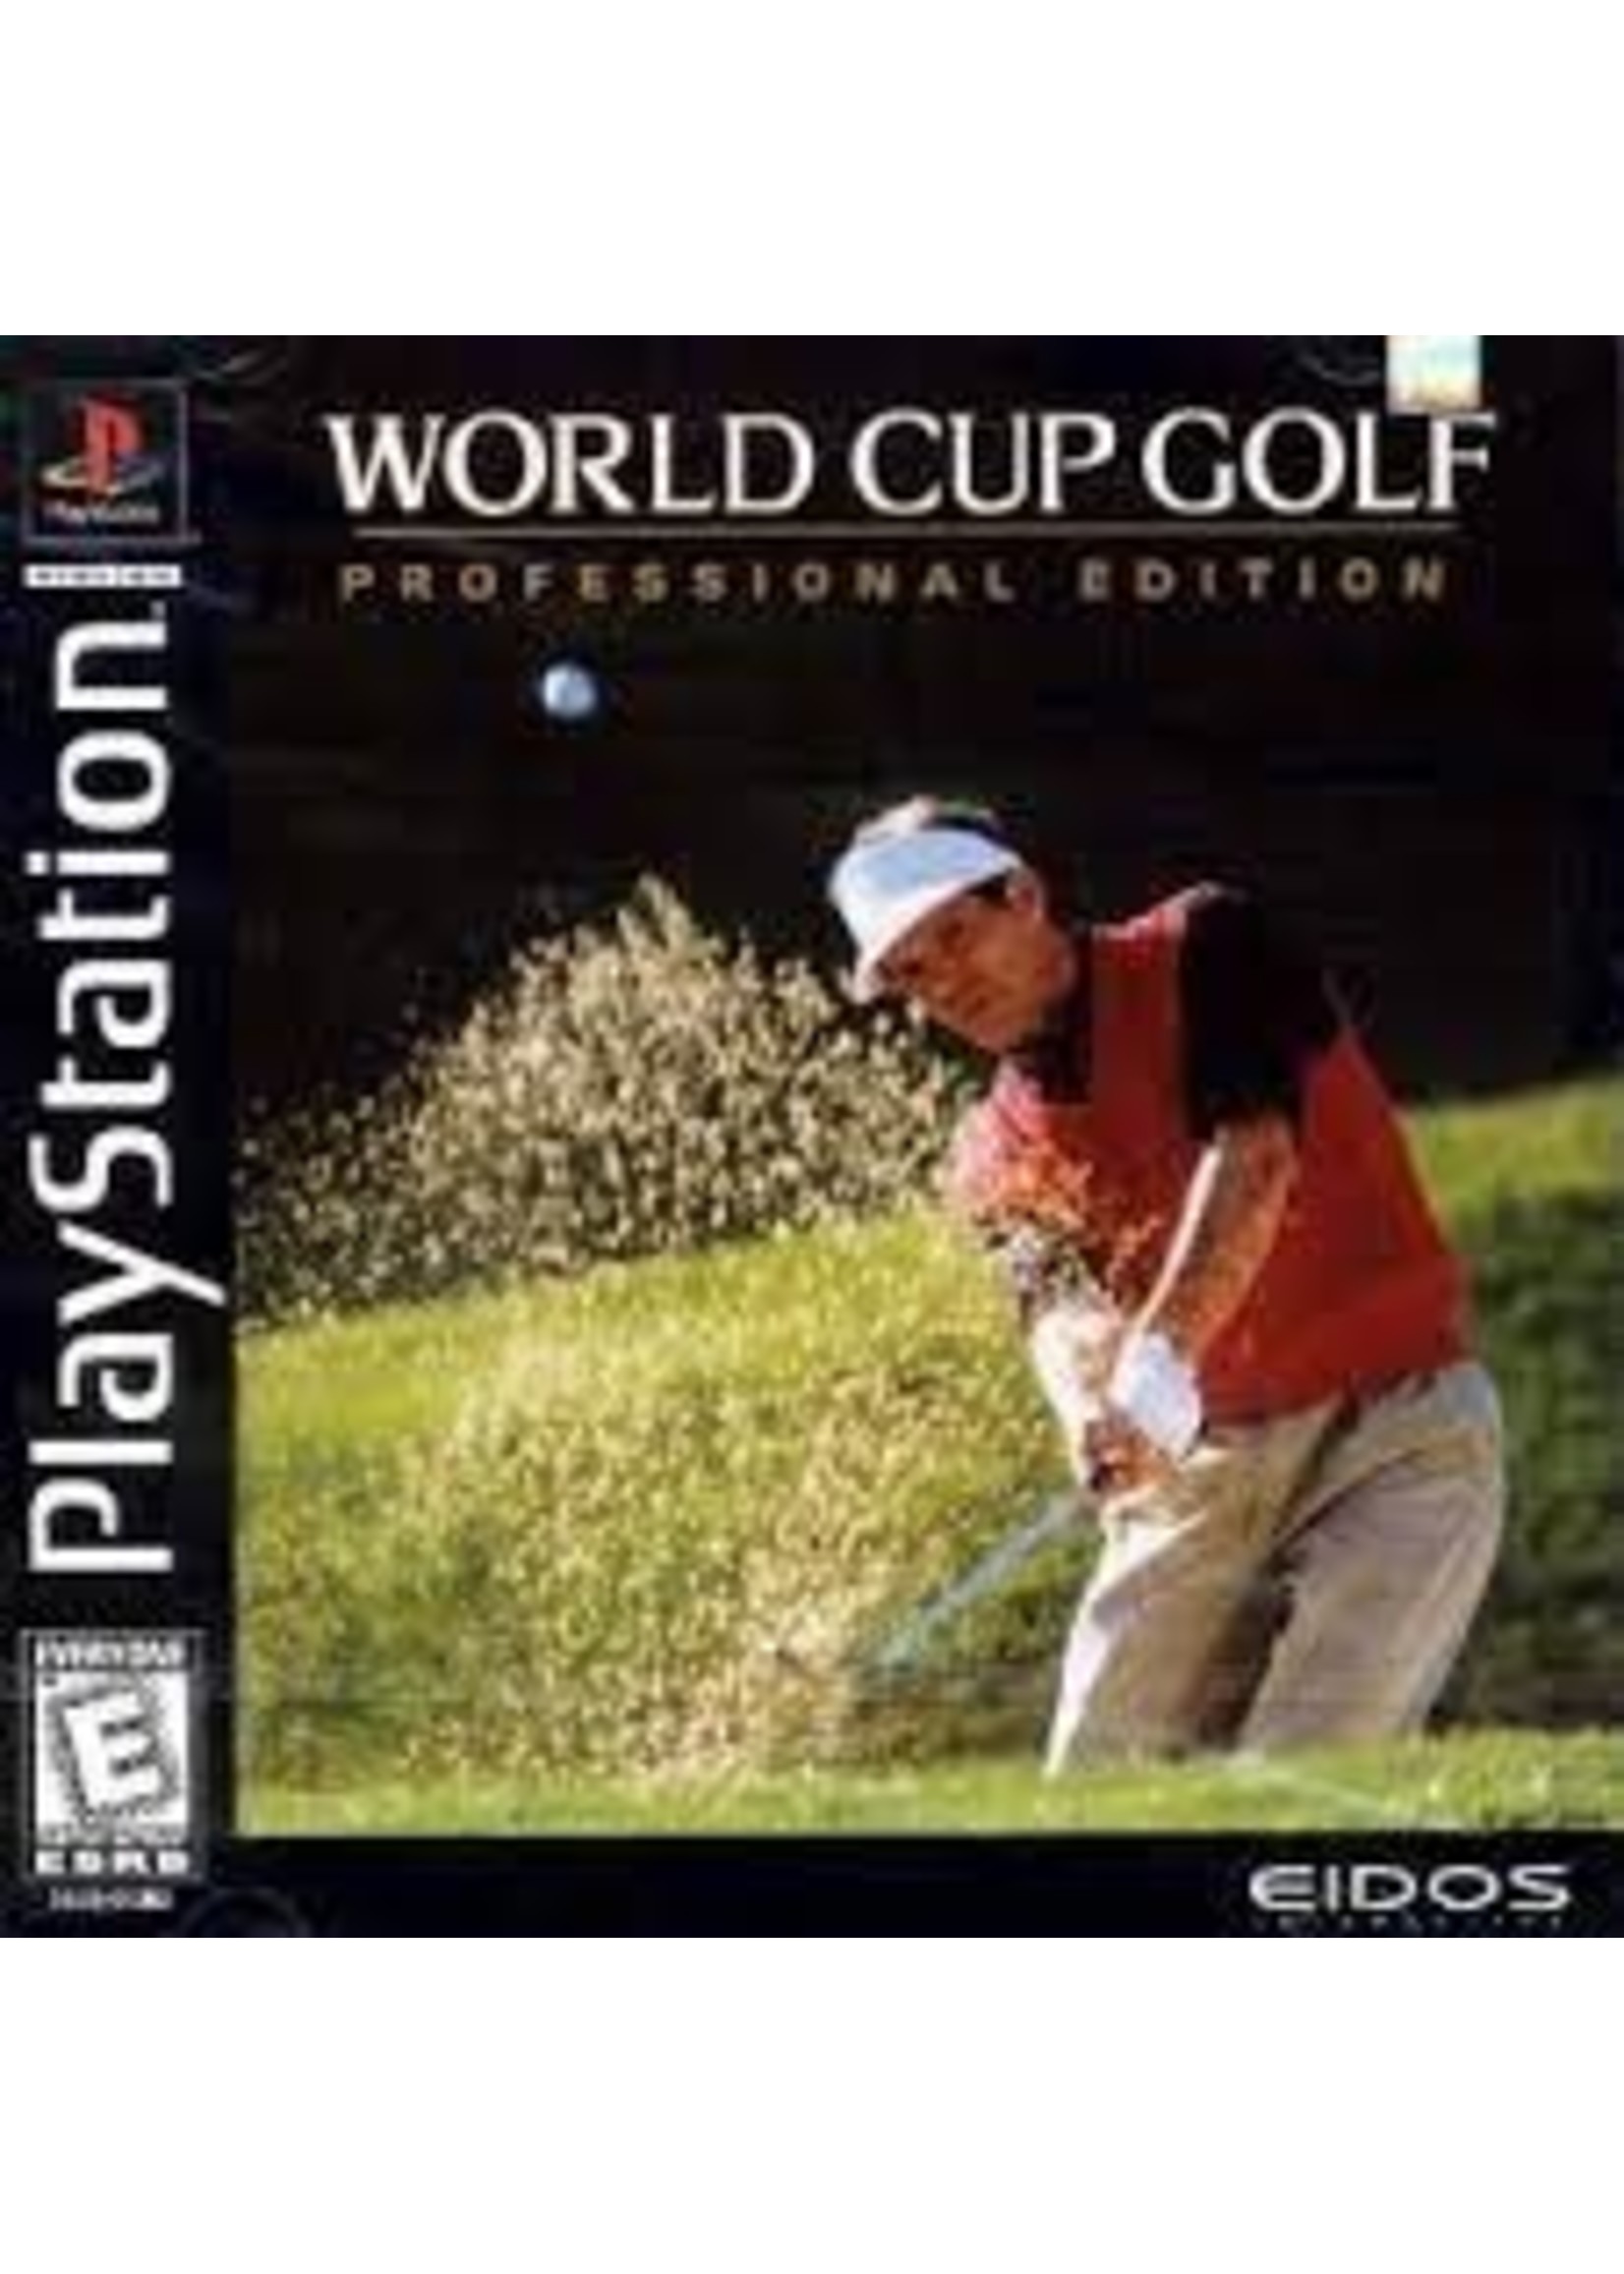 Sony Playstation 1 (PS1) World Cup Golf Professional Edition